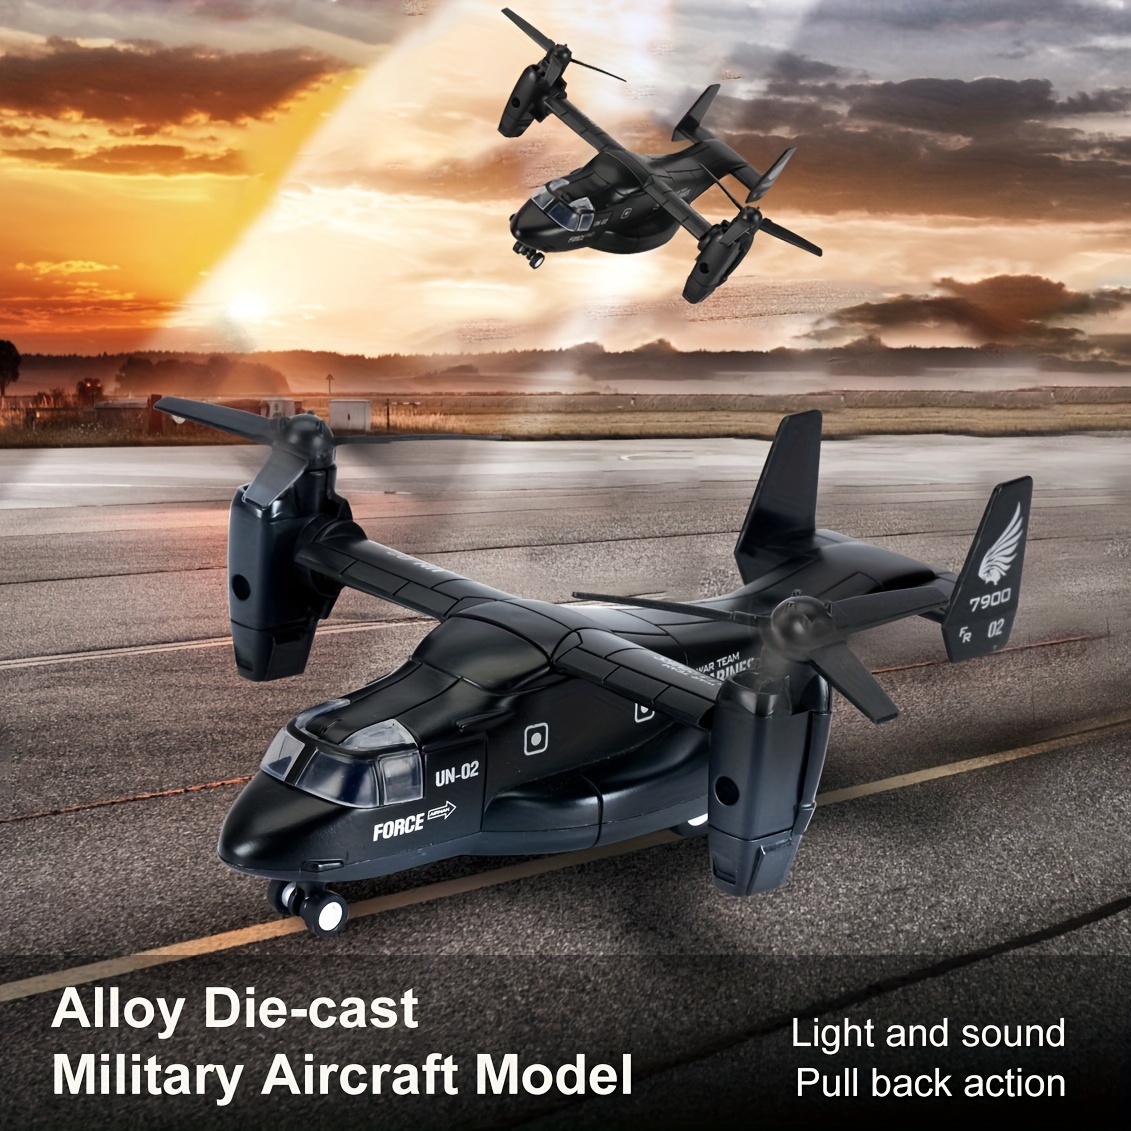 Alloy Helicopter Model Toy With Pullback Mode Light And Sound Effects